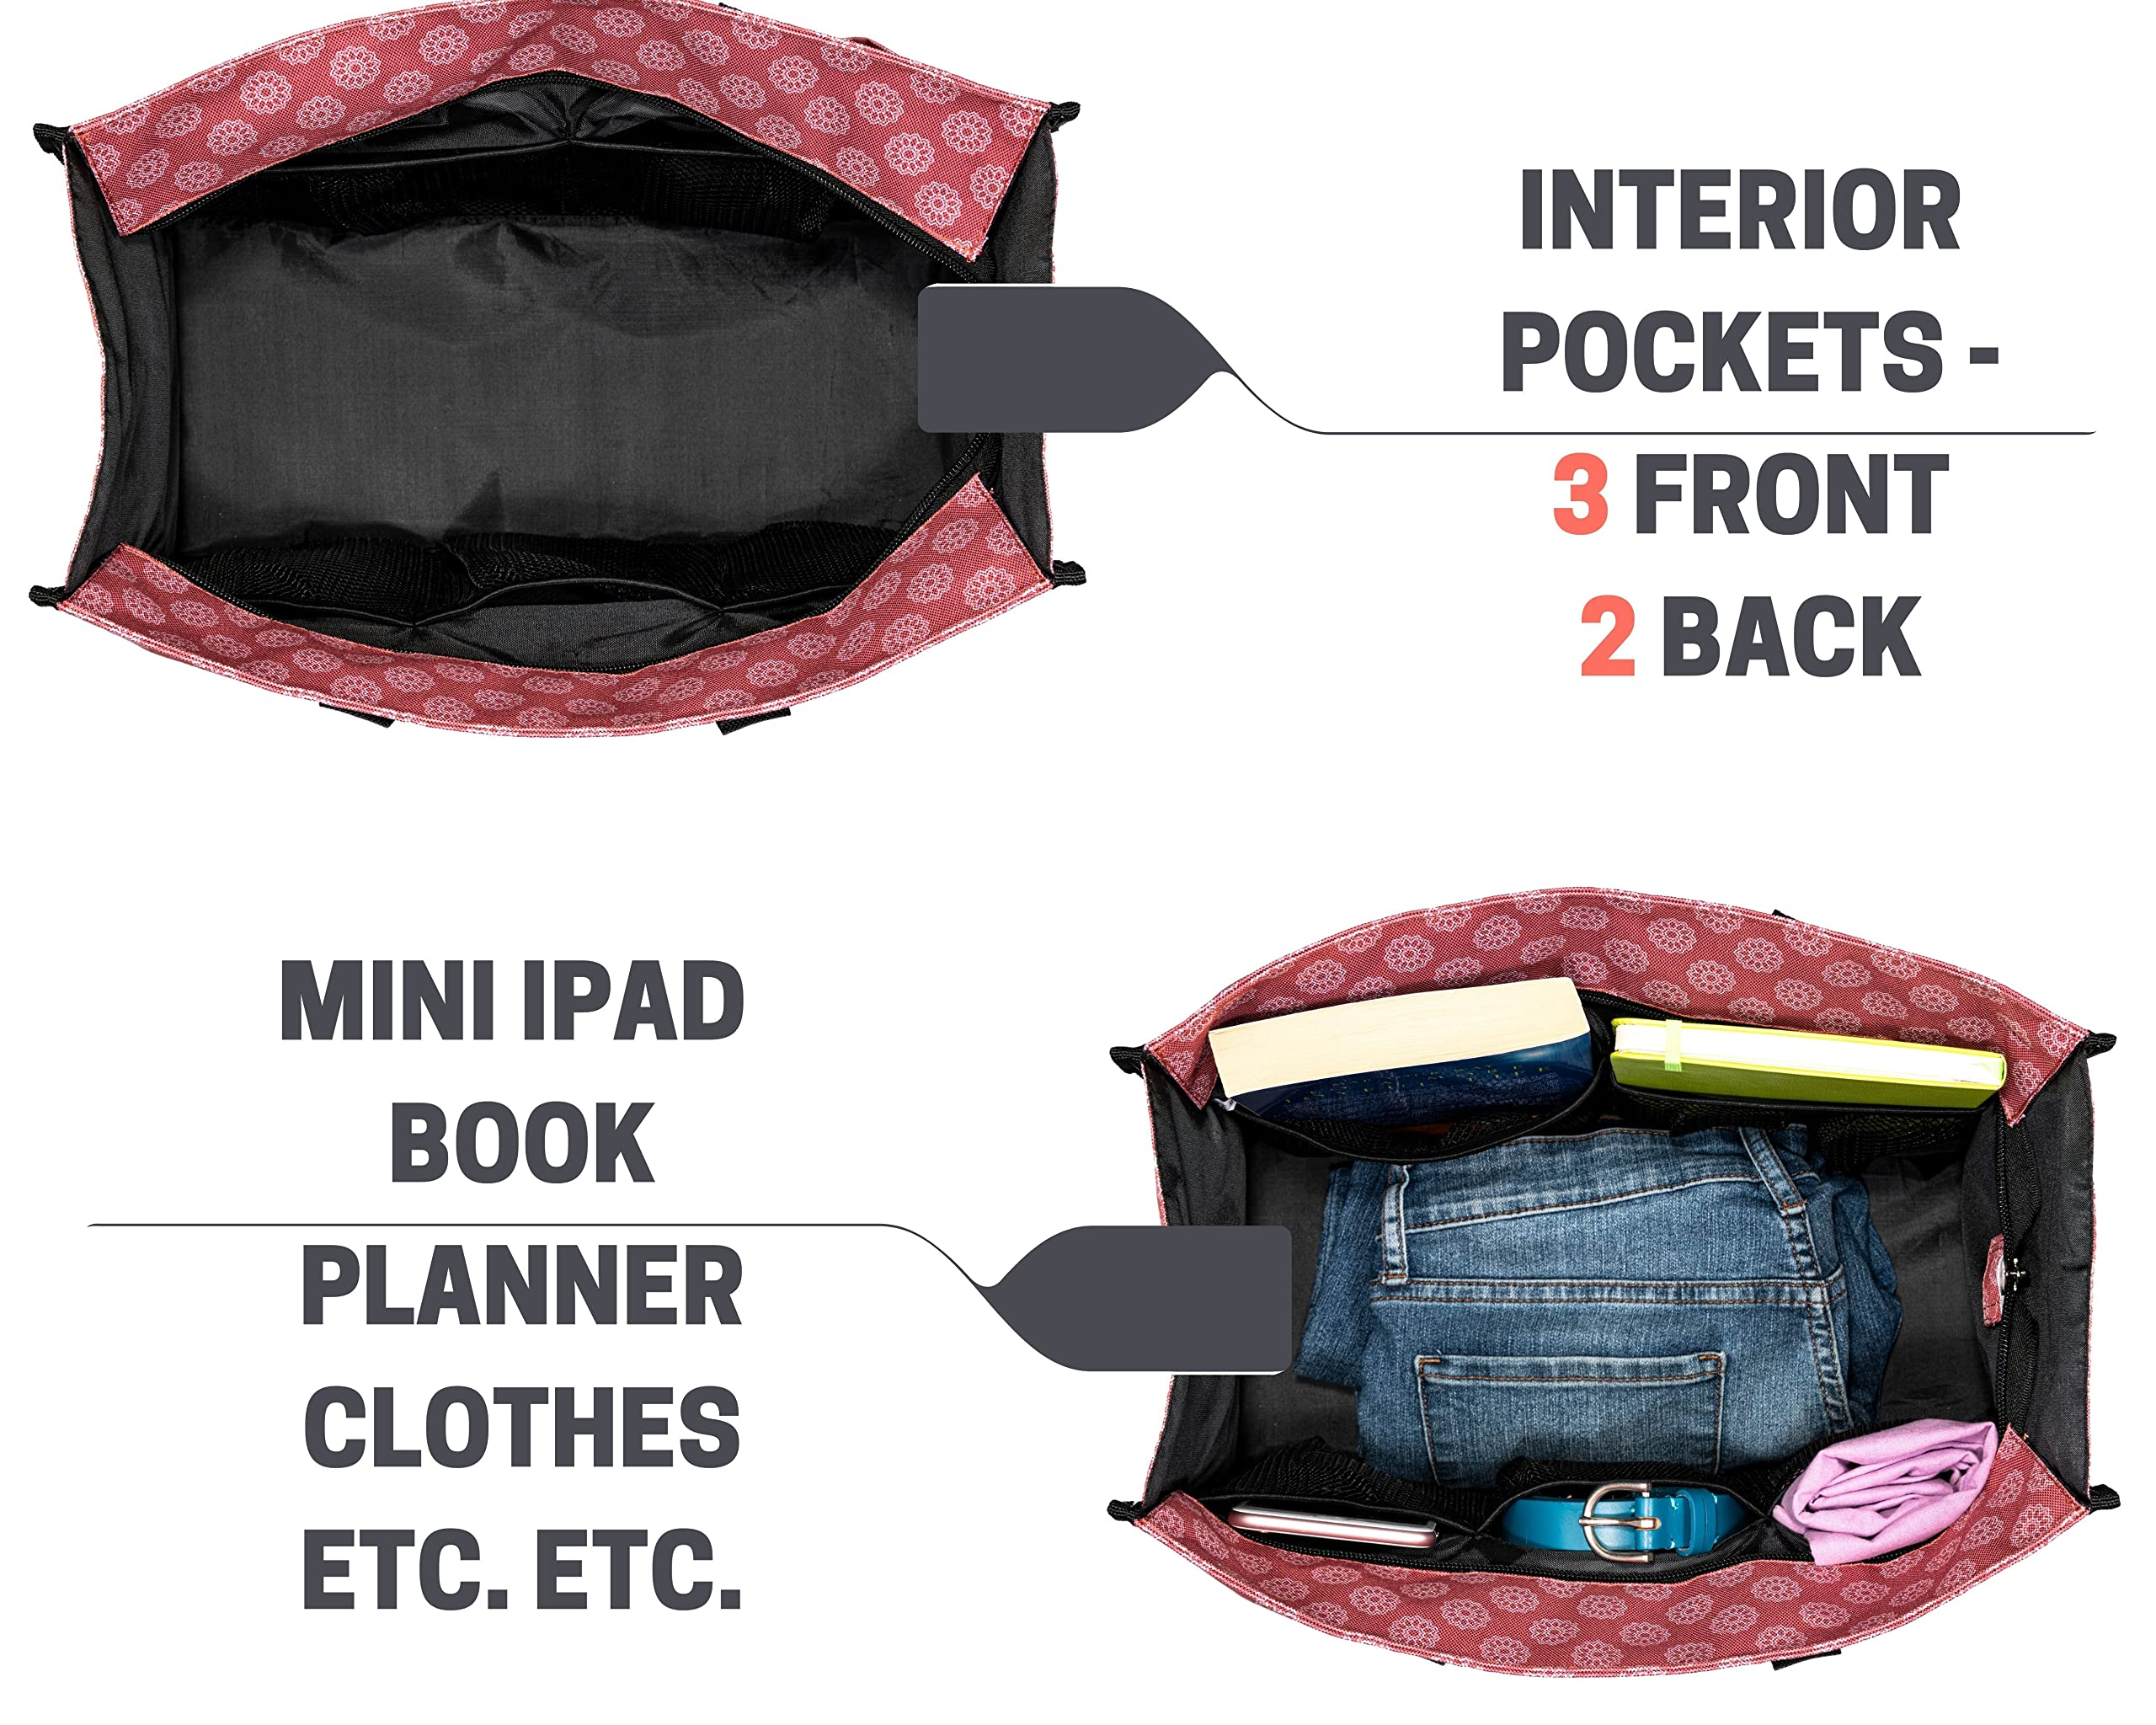 Wholesale large capacity Teacher book sling Bag with pockets and mesh pockets inside for women